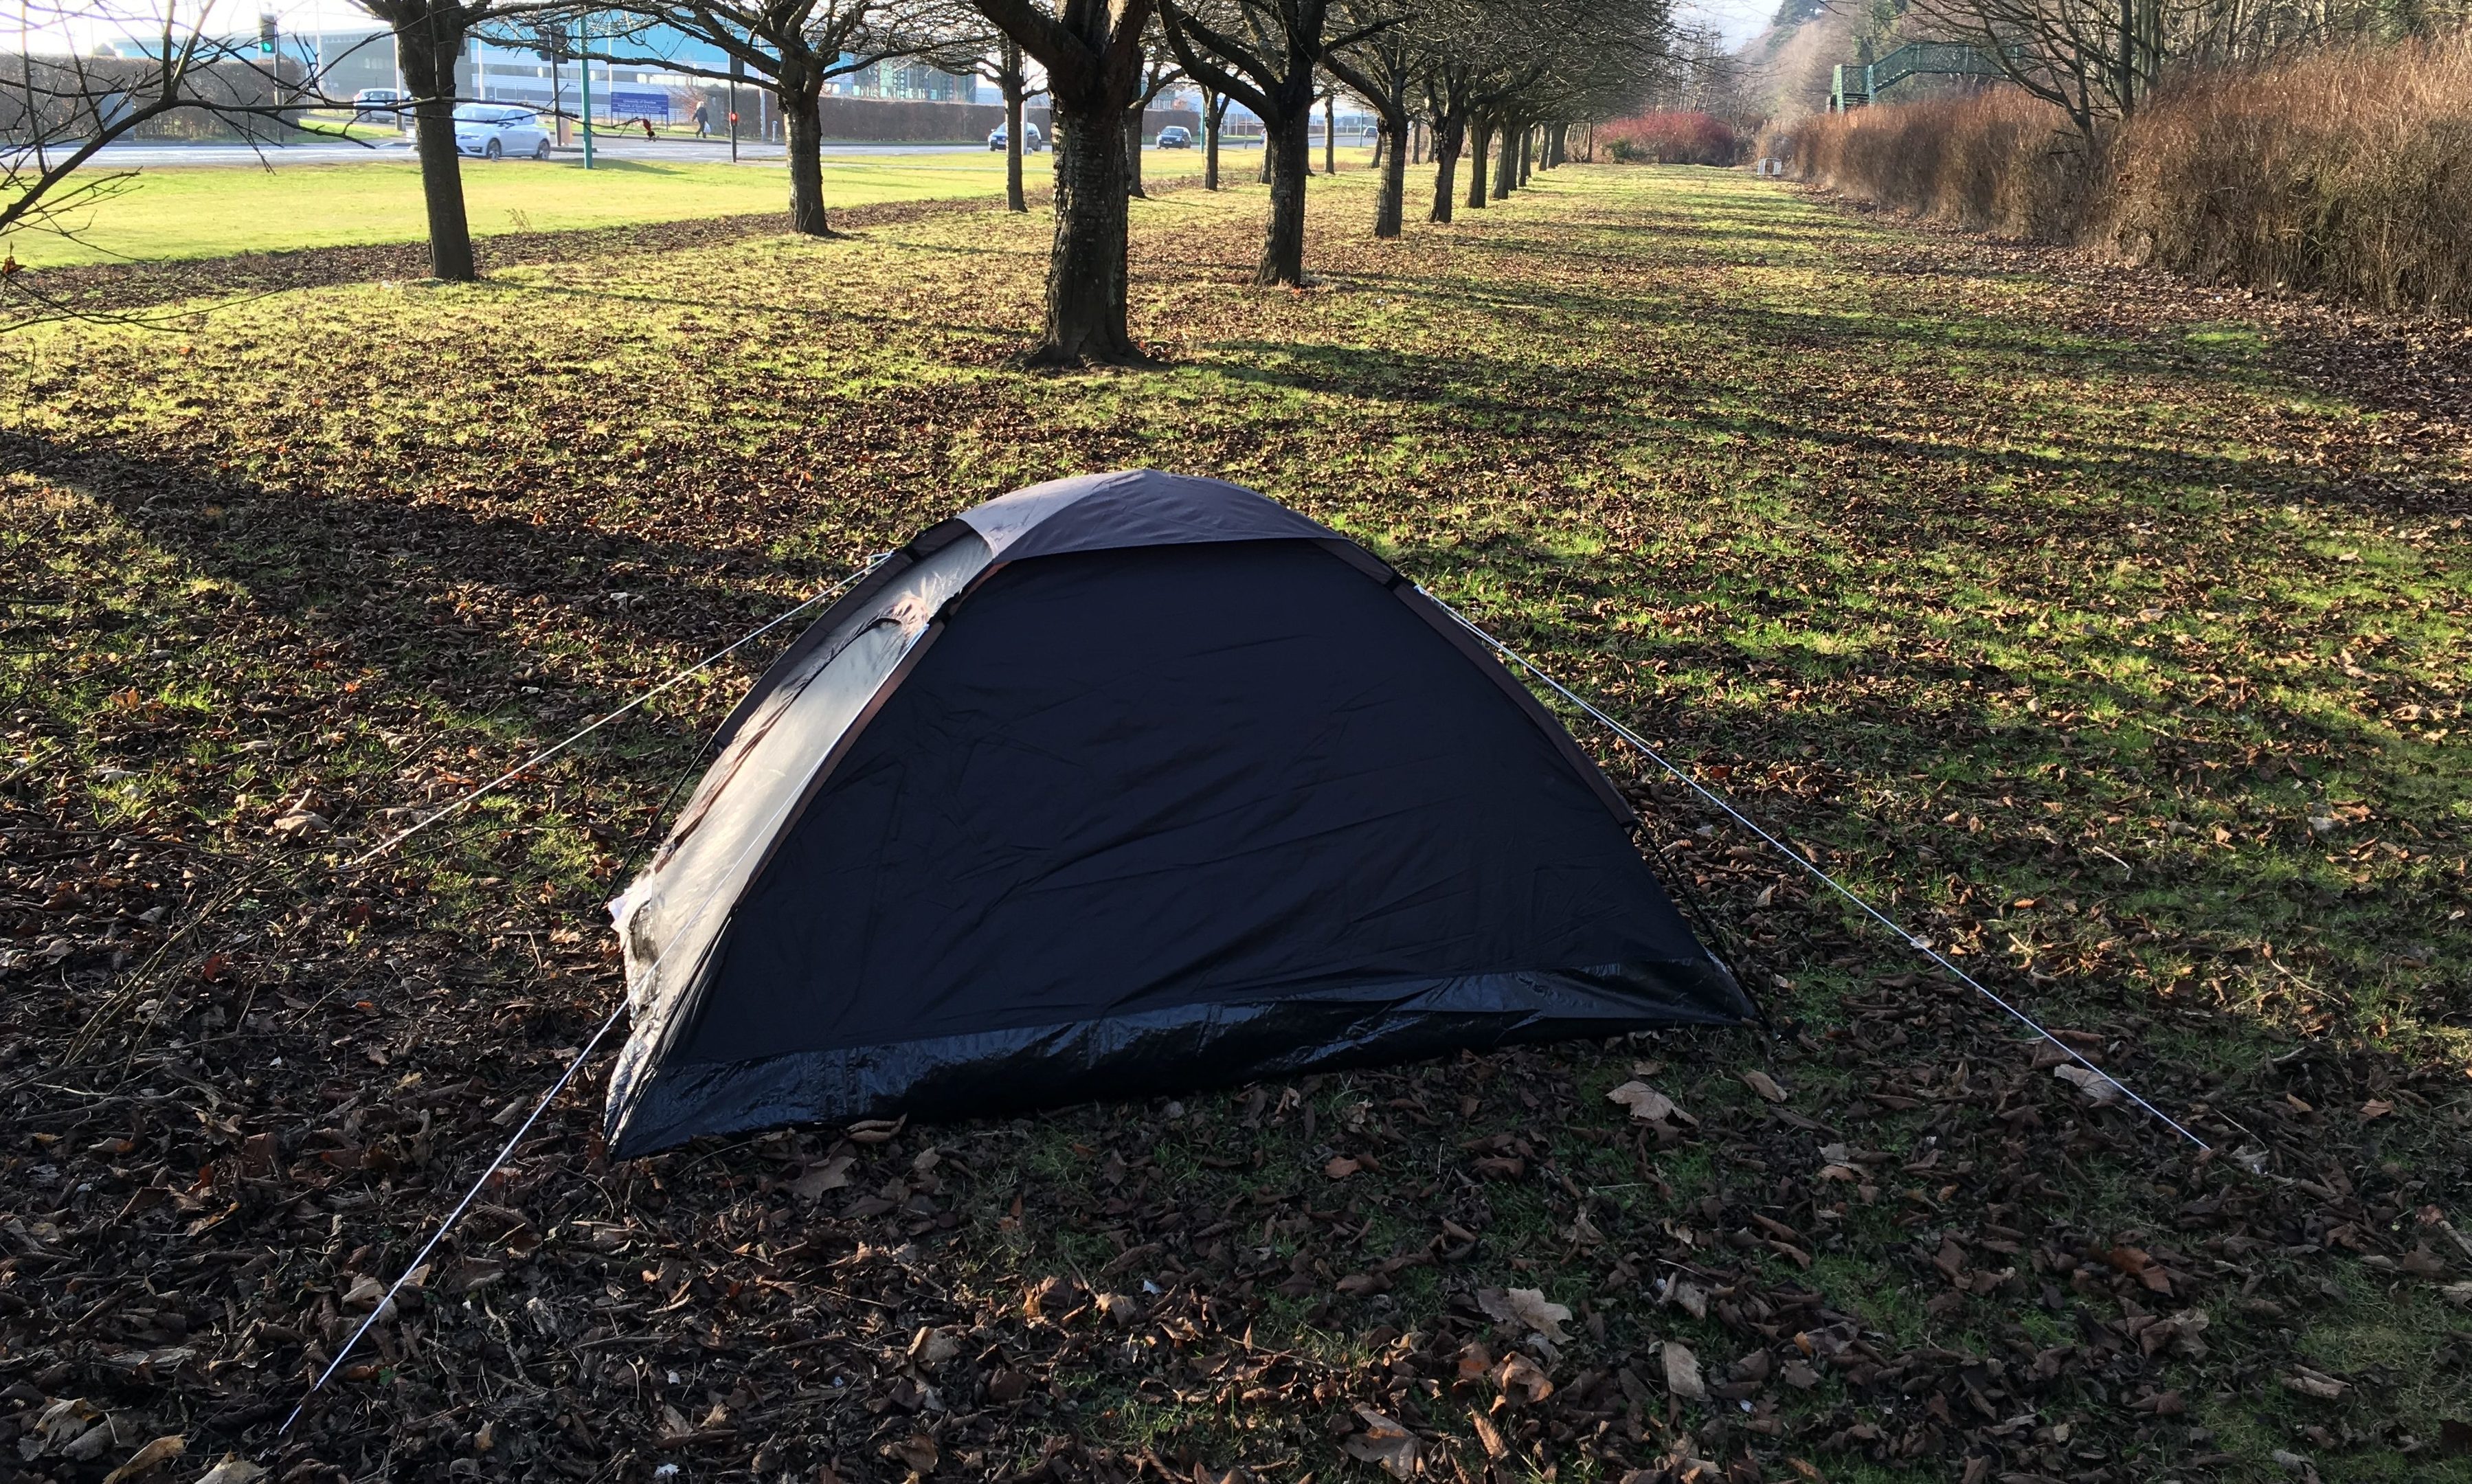 The tent was pitched alongside Riverside Drive.